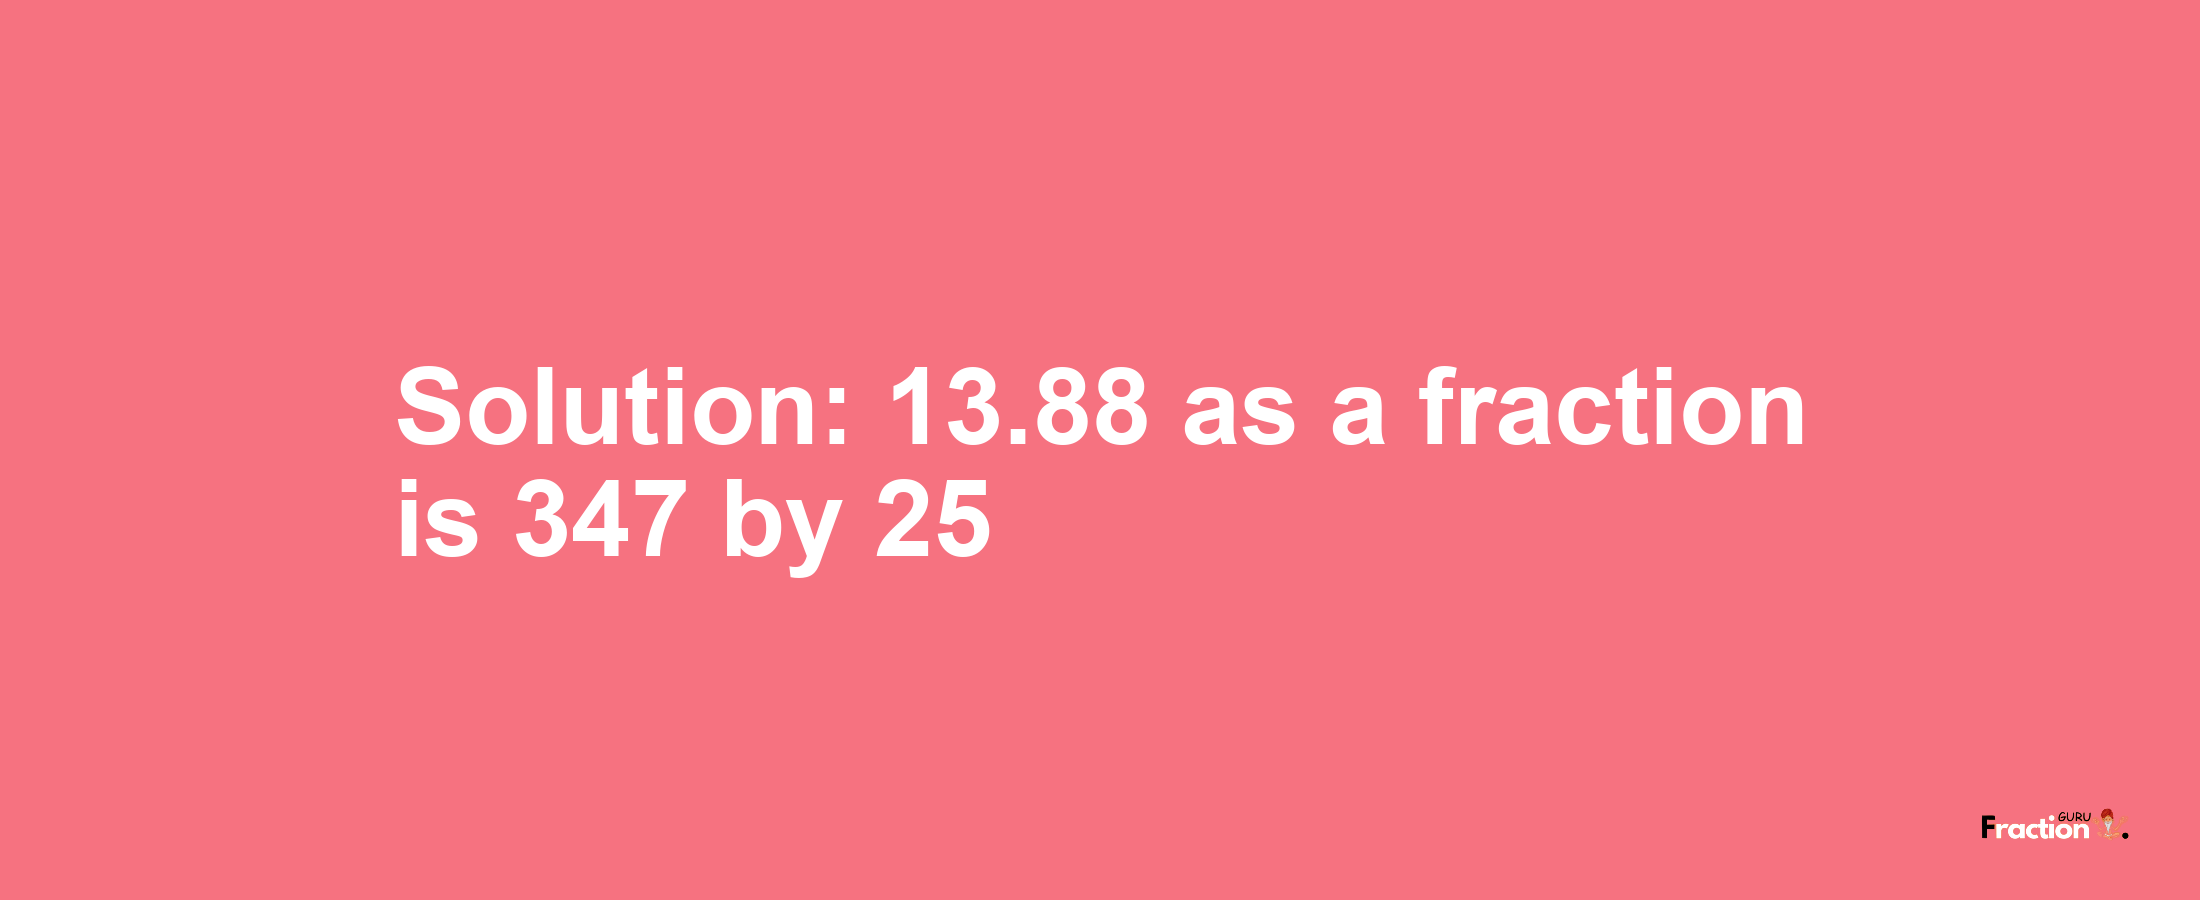 Solution:13.88 as a fraction is 347/25